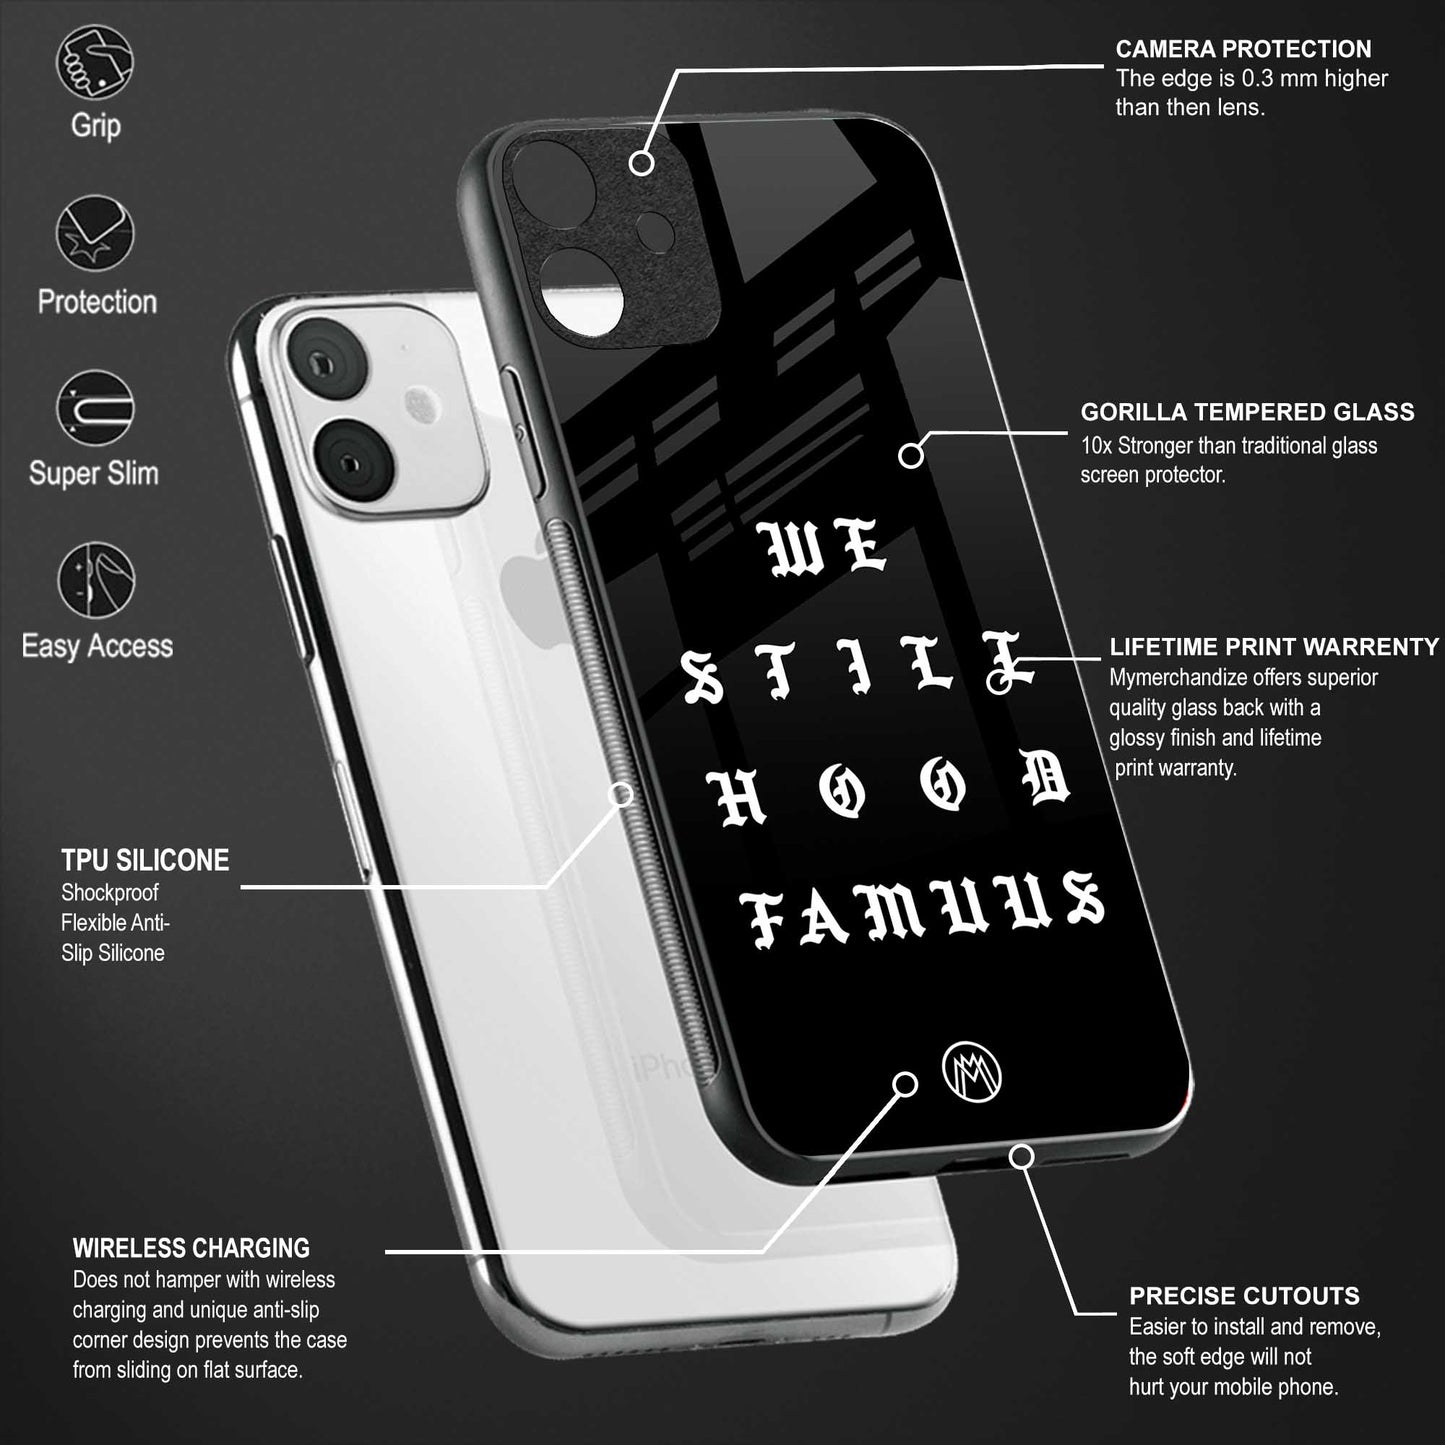 hood famous phone cover for vivo y93